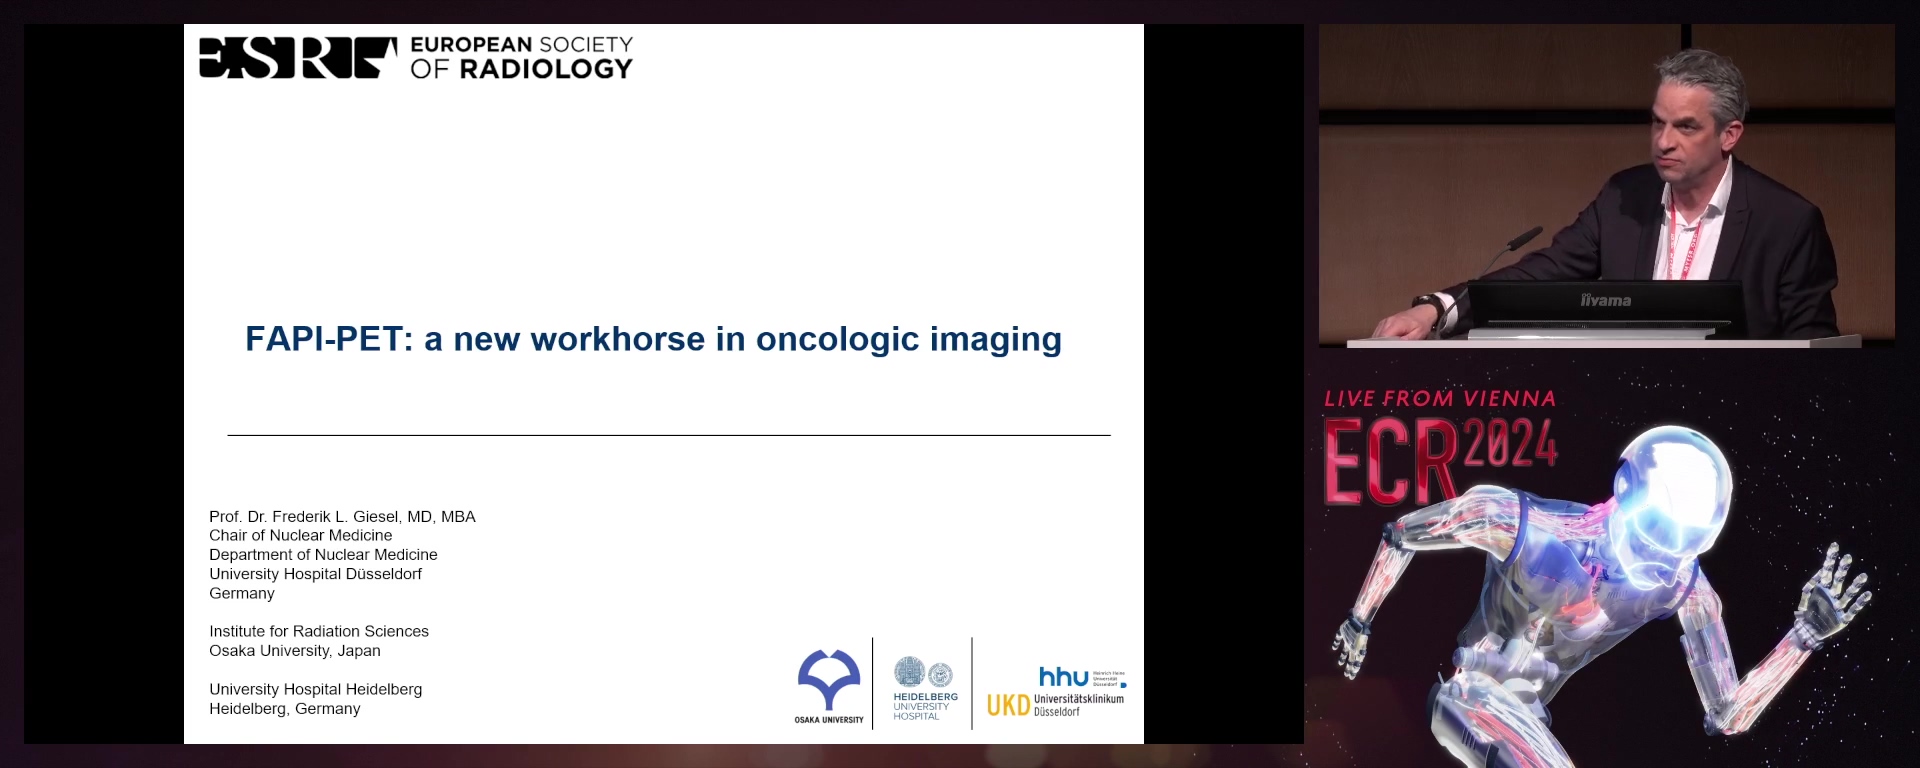 FAPI-PET: a new workhorse in oncologic imaging?